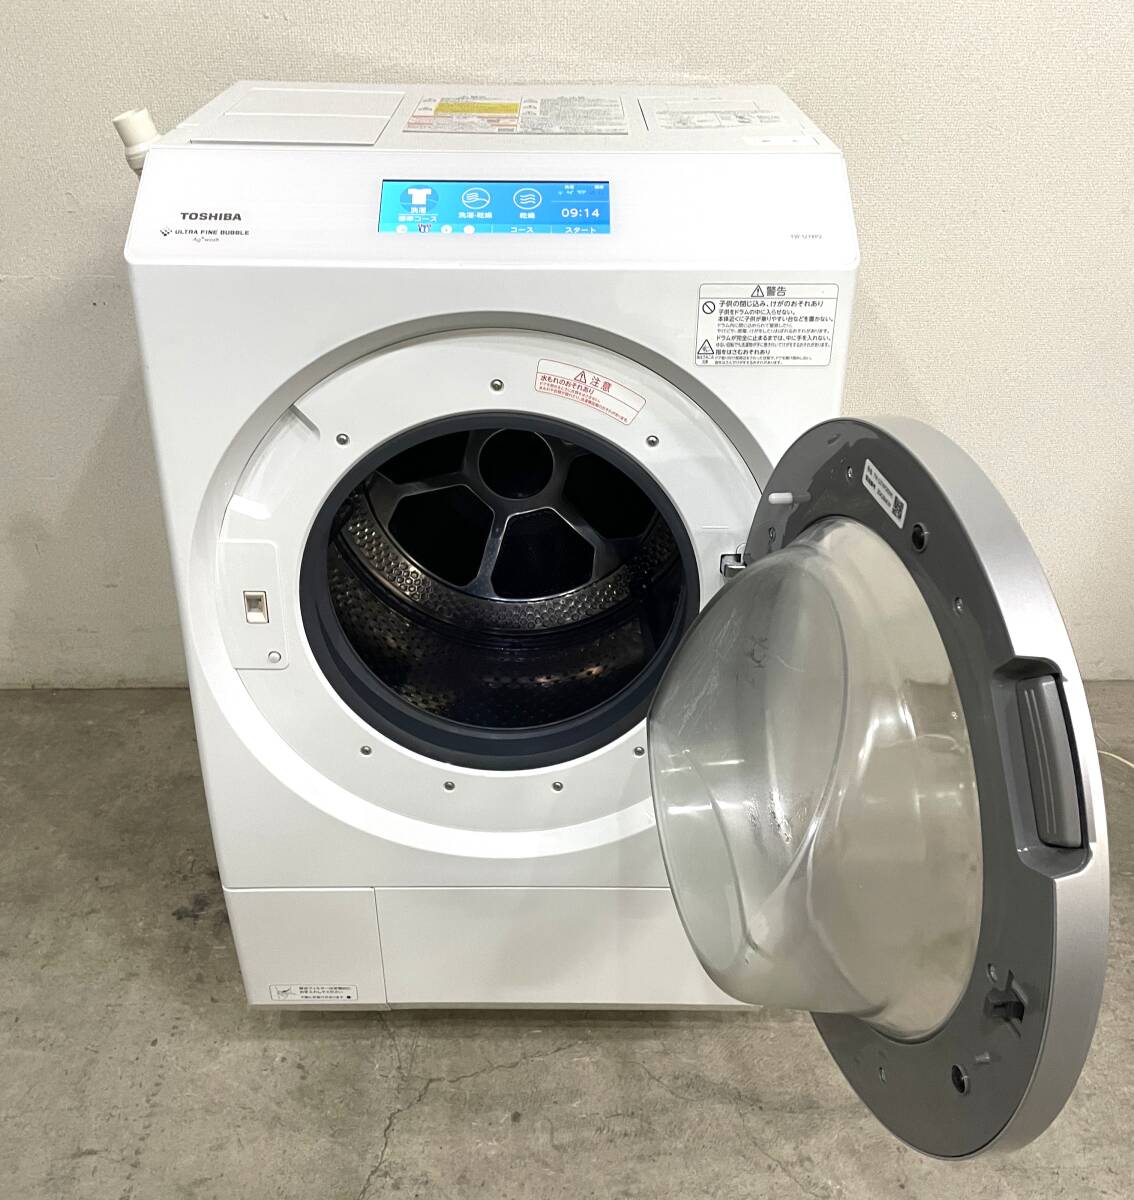 * beautiful goods /TOSHIBA/ Toshiba /TW-127XP2R/ drum type laundry dryer /ZABOON/ laundry 12.0kg dry 7.0kg/2022 year made / operation excellent / have been cleaned *